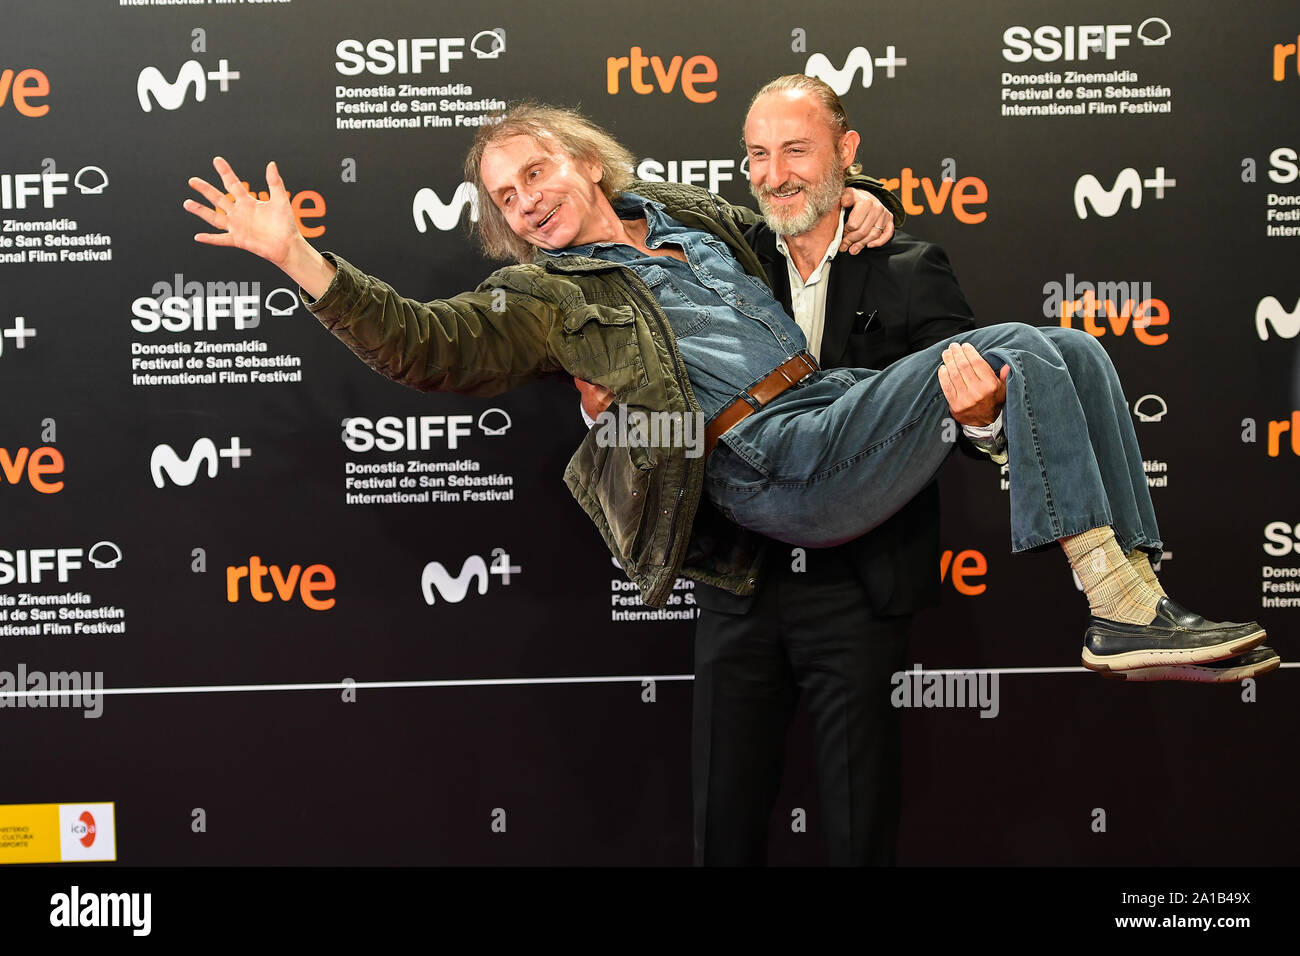 San Sebastian, Spain. 25th September 2019. Michel Houellebecq and Guillaume Nicloux attend photocall for the film 'Thalasso' at the 67th International Film Festival of San Sebastian. Credit: Julen Pascual Gonzalez/Alamy Live News Stock Photo